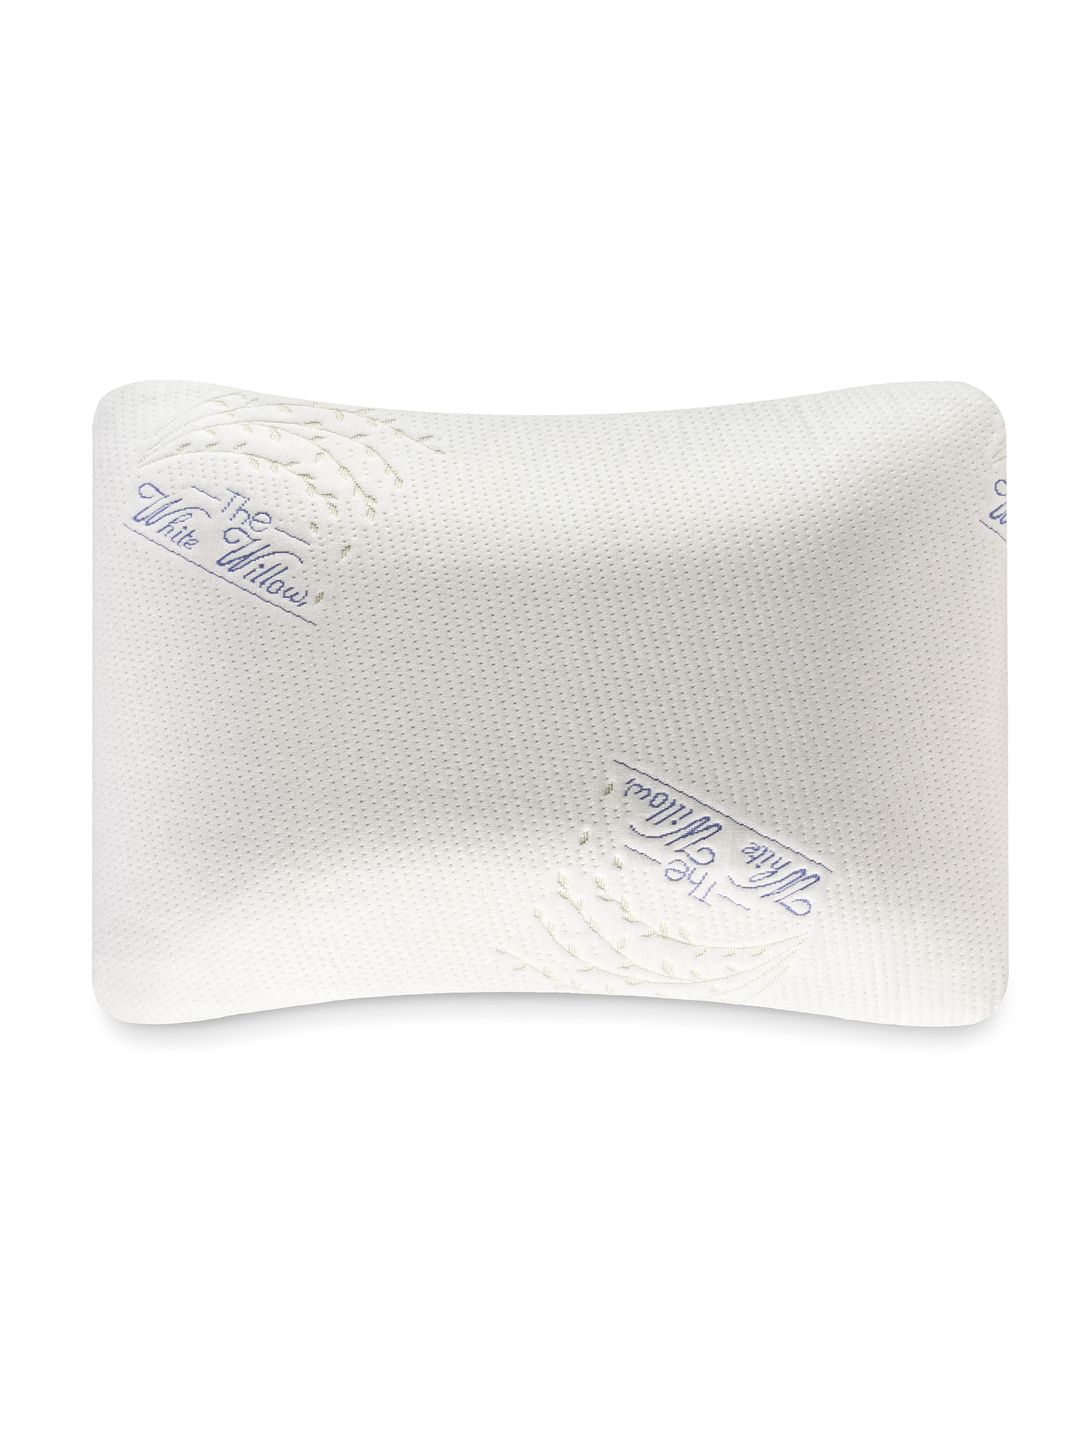 The White Willow White Signature Dual-Sided Reversible Cooling Gel Memory Foam Bed Pillow Price in India